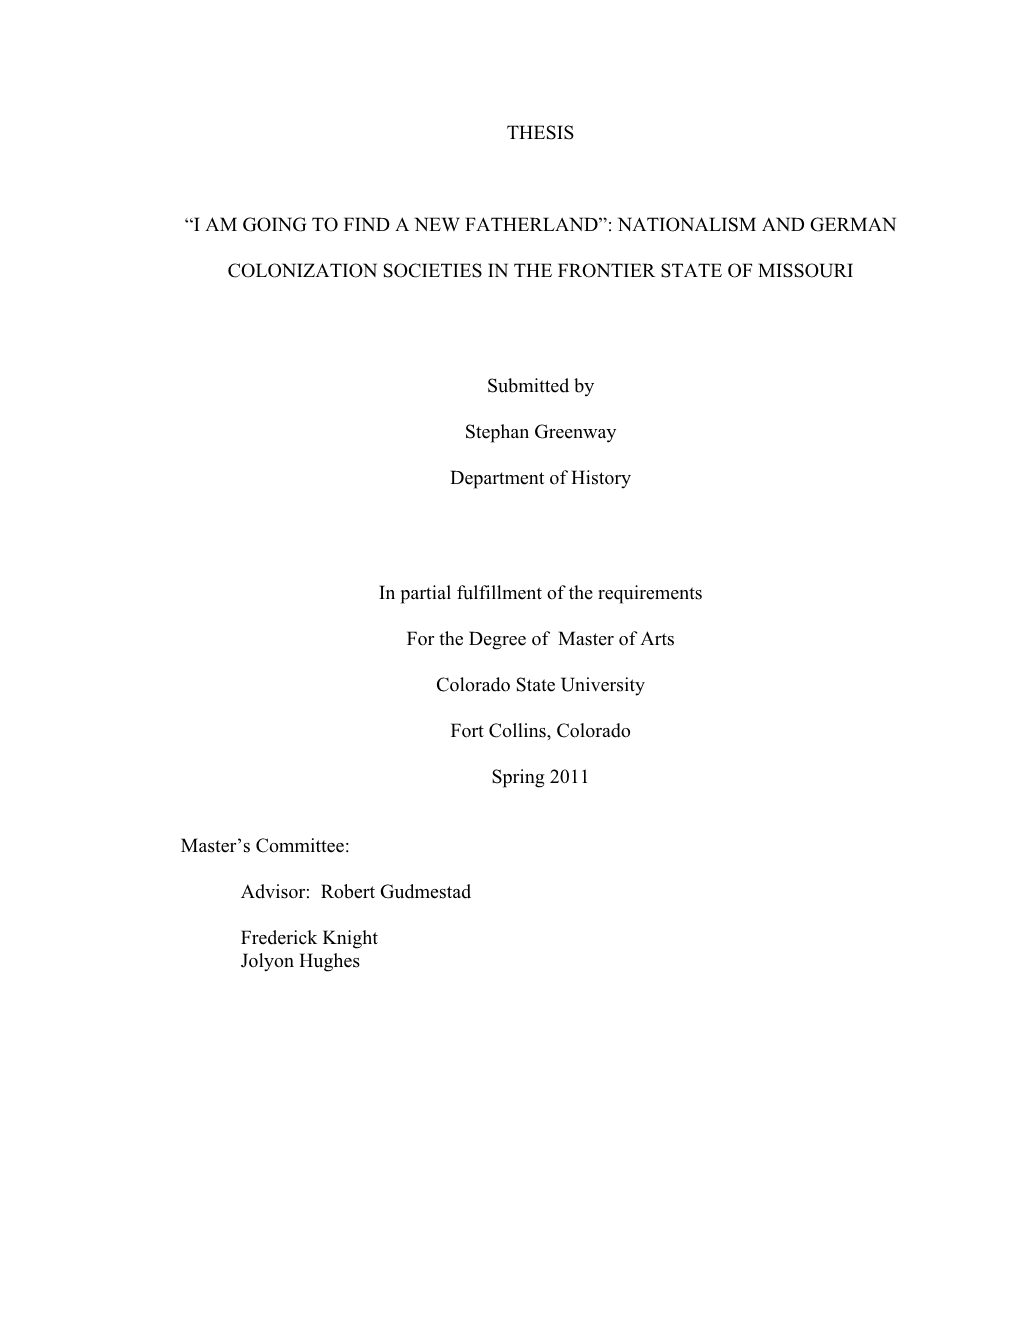 Thesis “I Am Going to Find a New Fatherland”: Nationalism